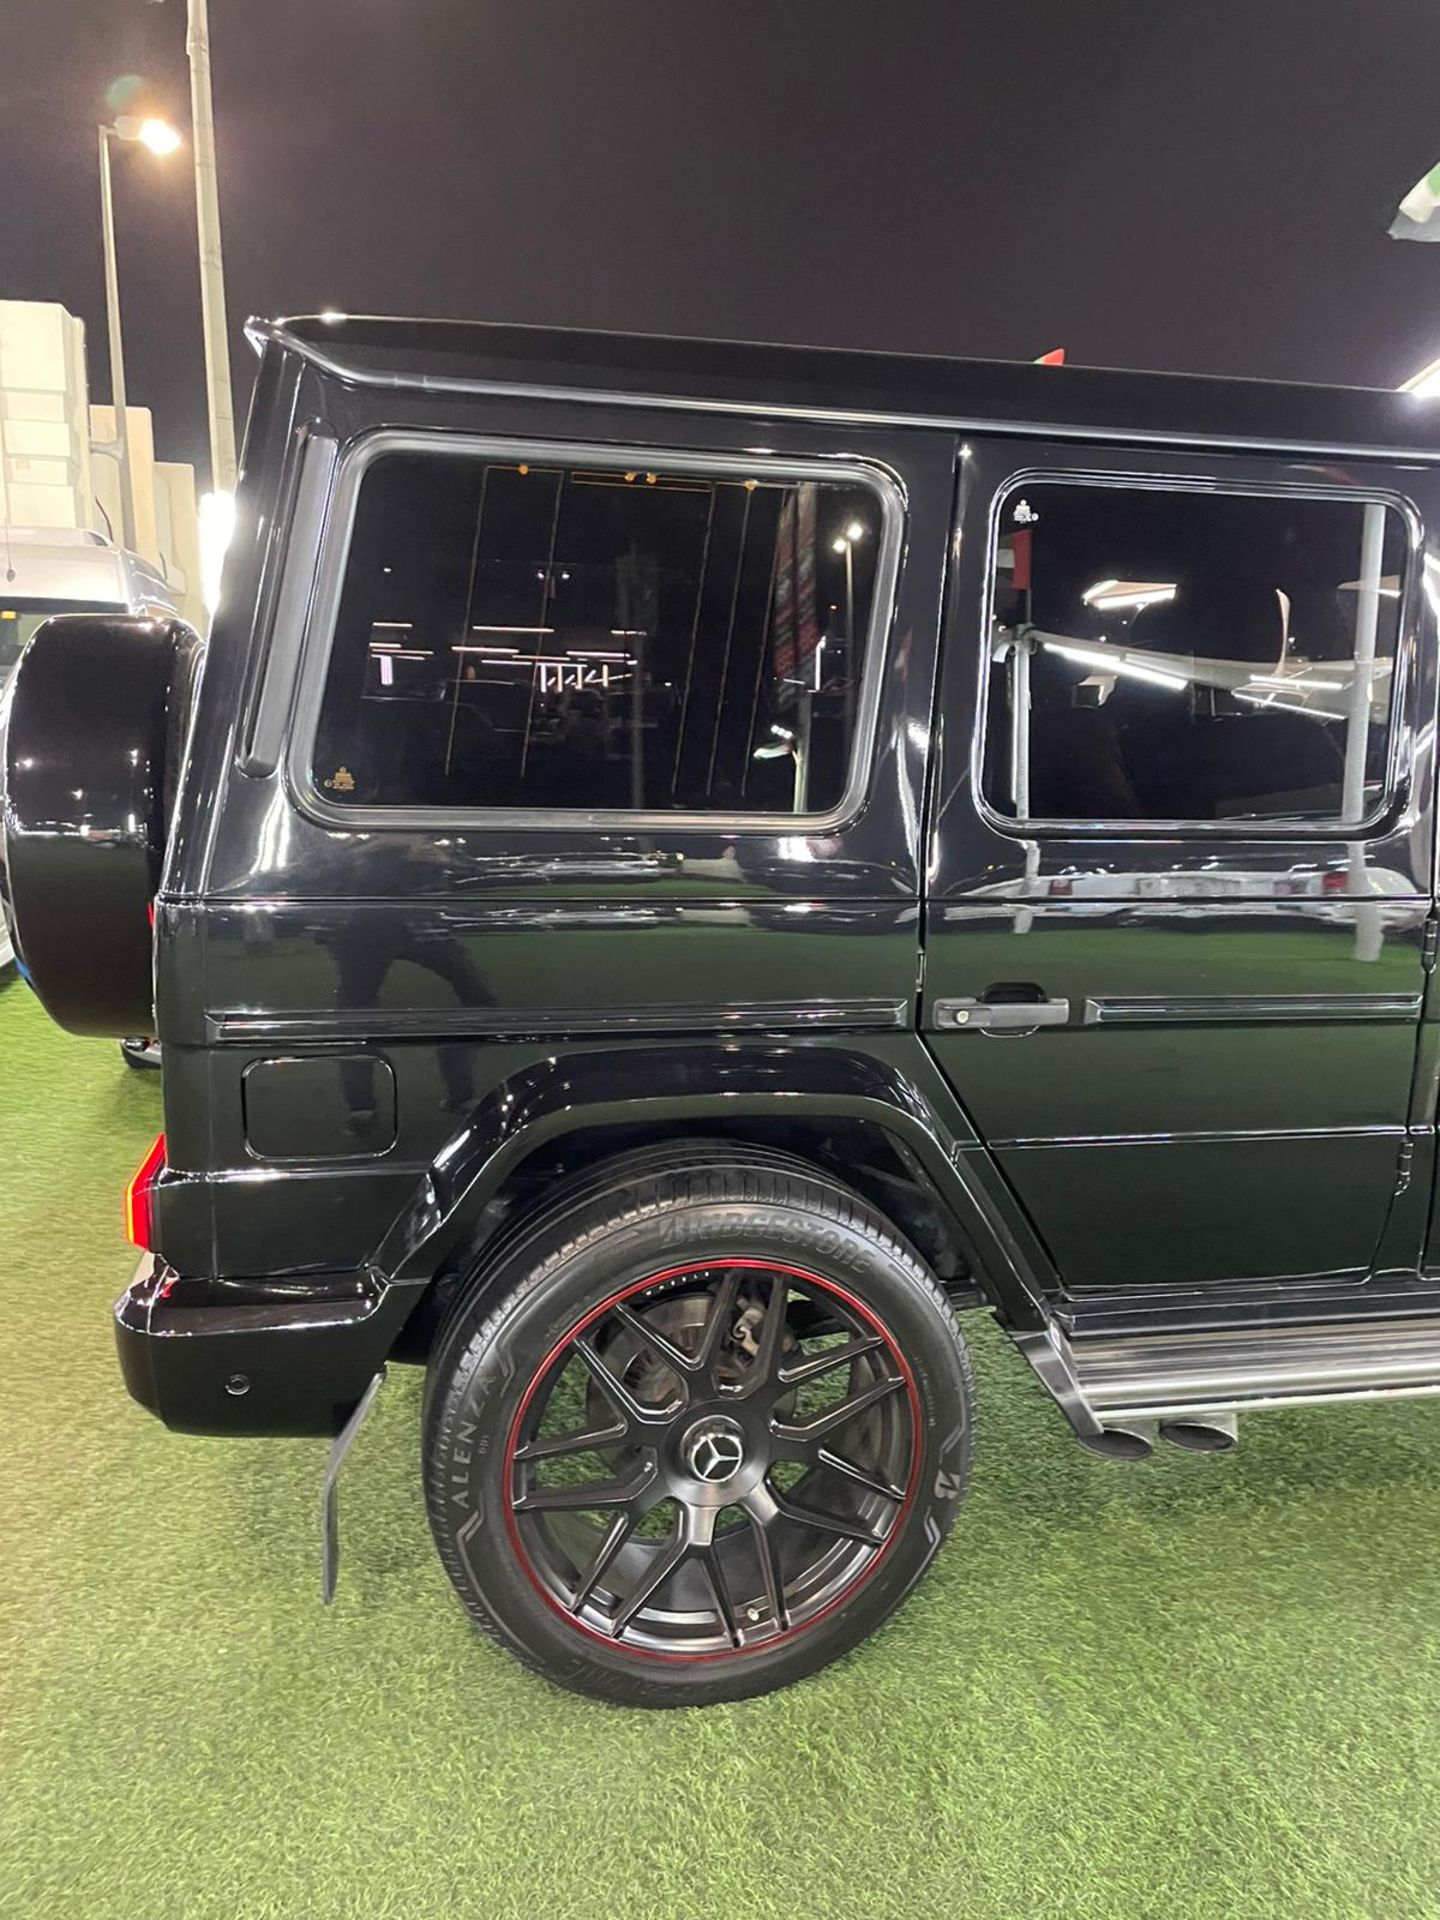 2011 MERCEDES G WAGON G55 changed to a 2020 G63 look Full outside exterior complete package !! - Image 21 of 36